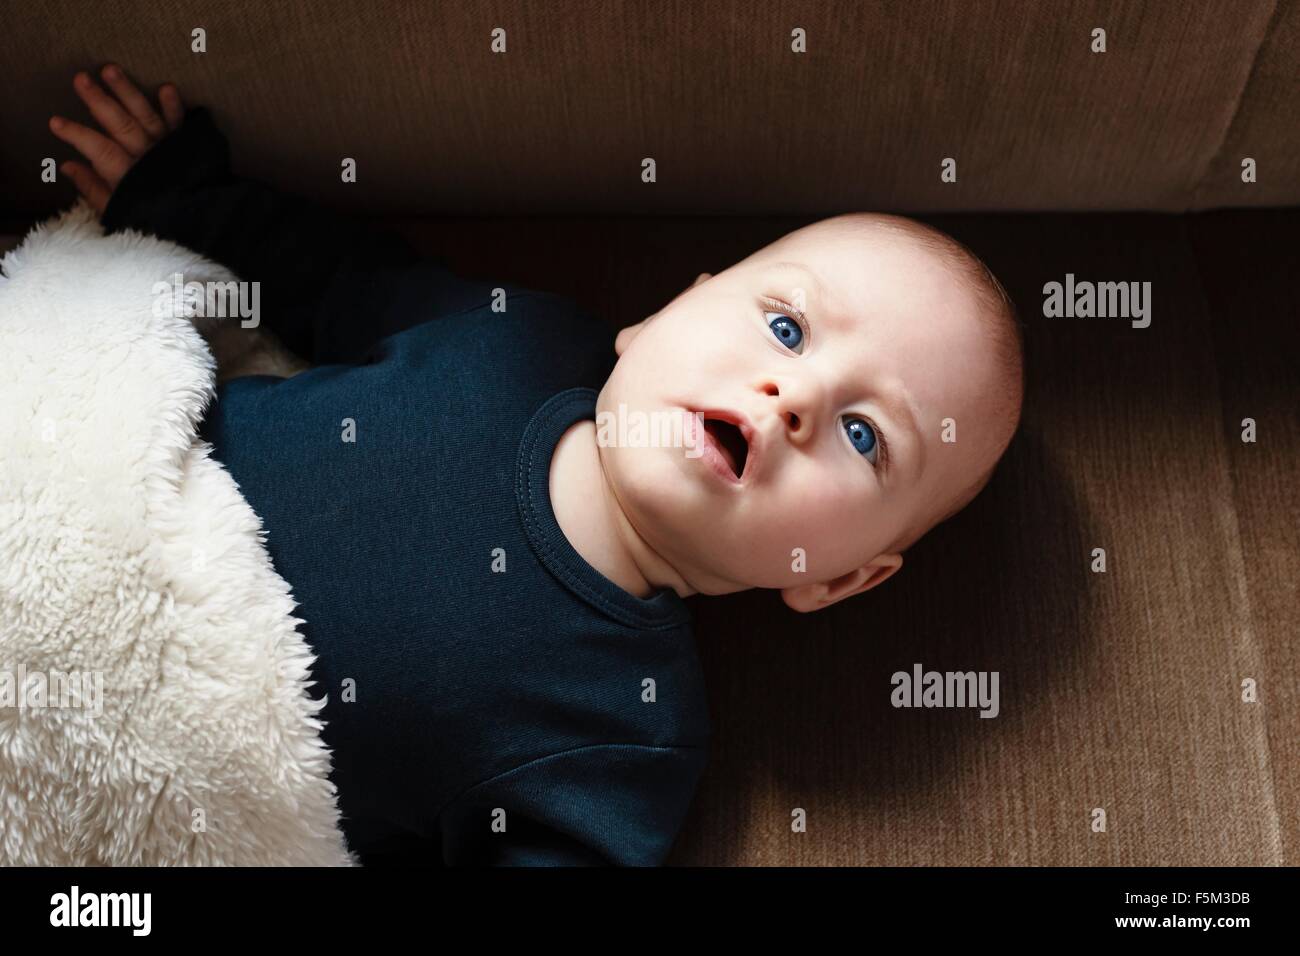 Overhead view of baby boy, looking up Stock Photo